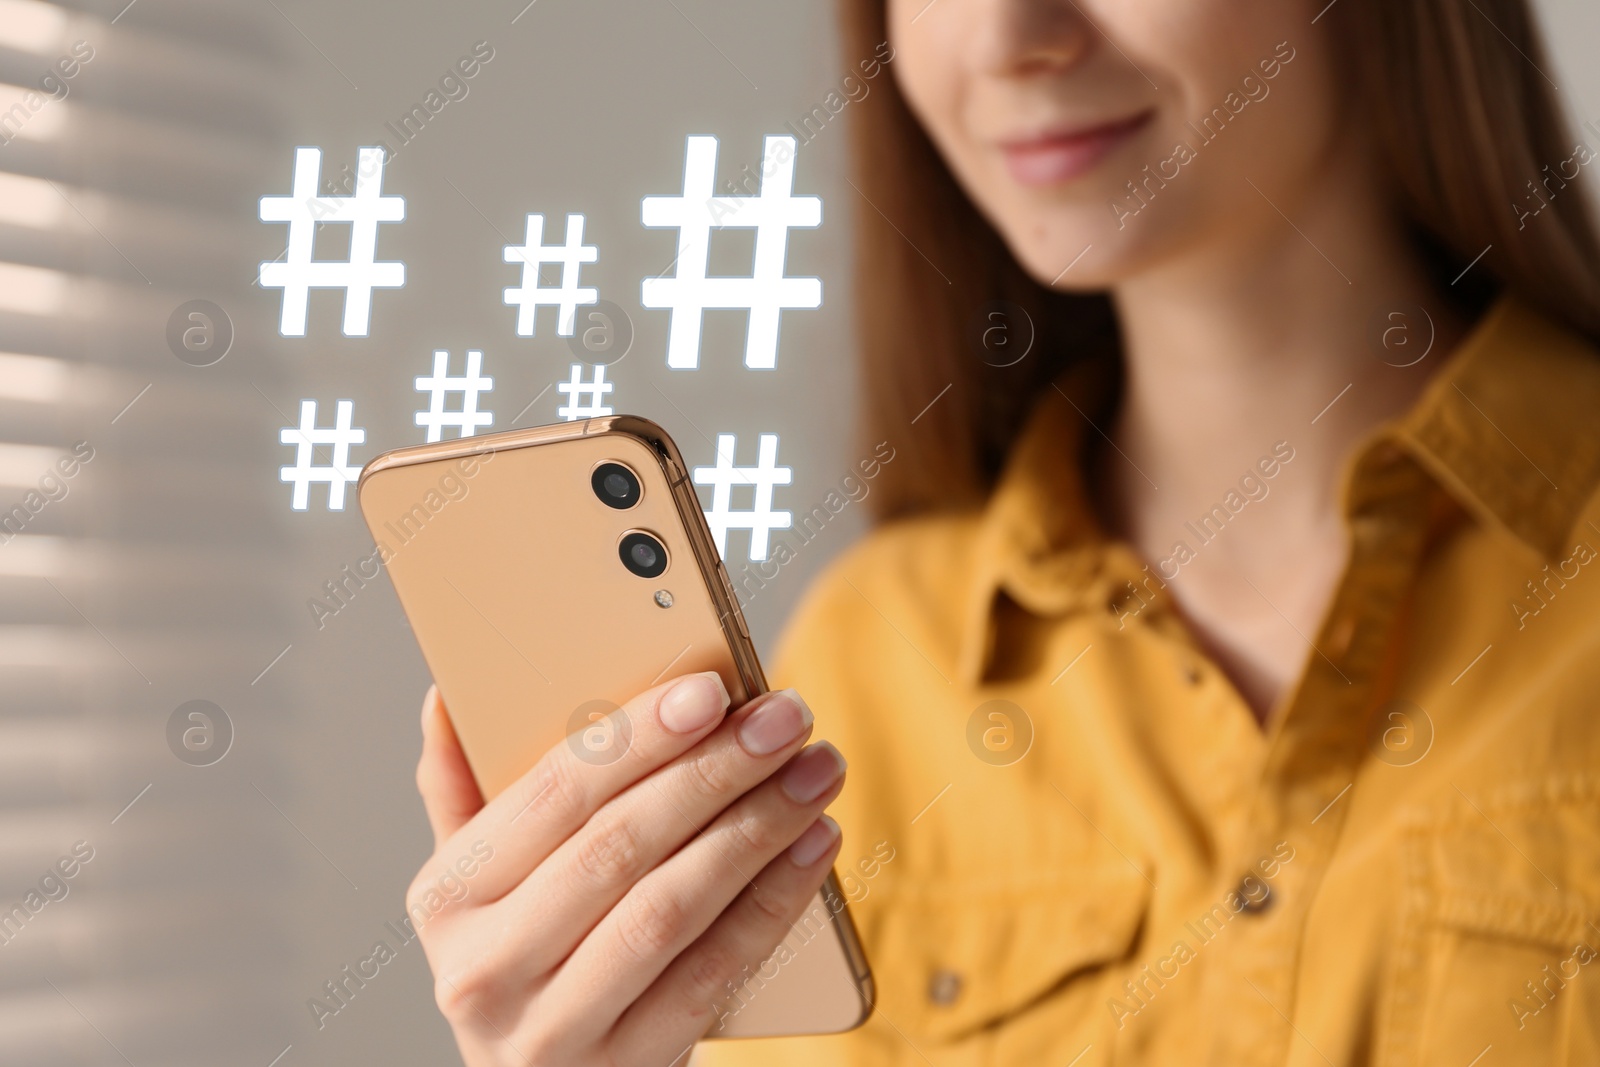 Image of Woman using modern smartphone, closeup. Hashtag symbols over device